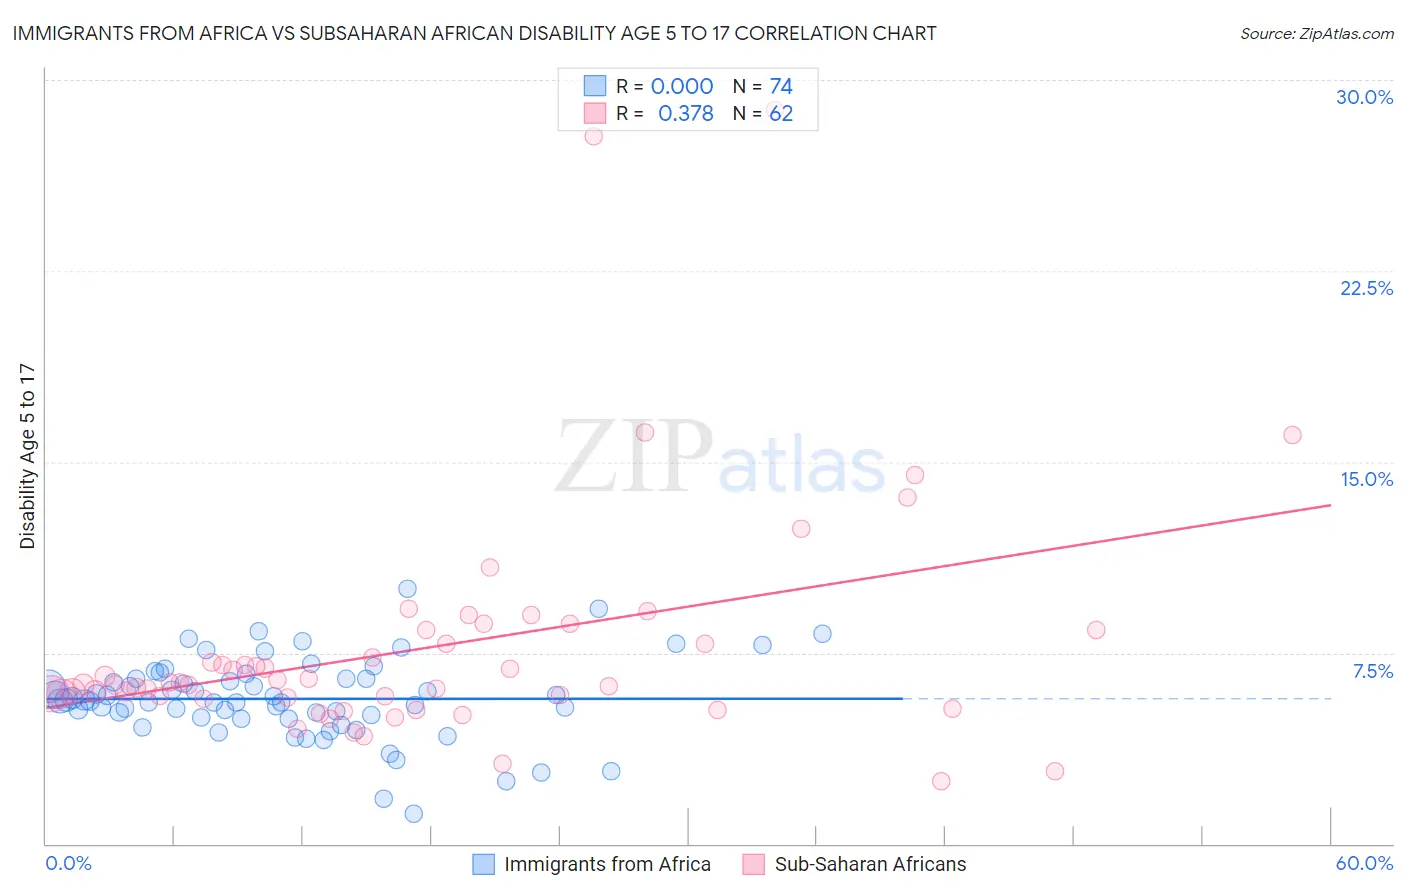 Immigrants from Africa vs Subsaharan African Disability Age 5 to 17